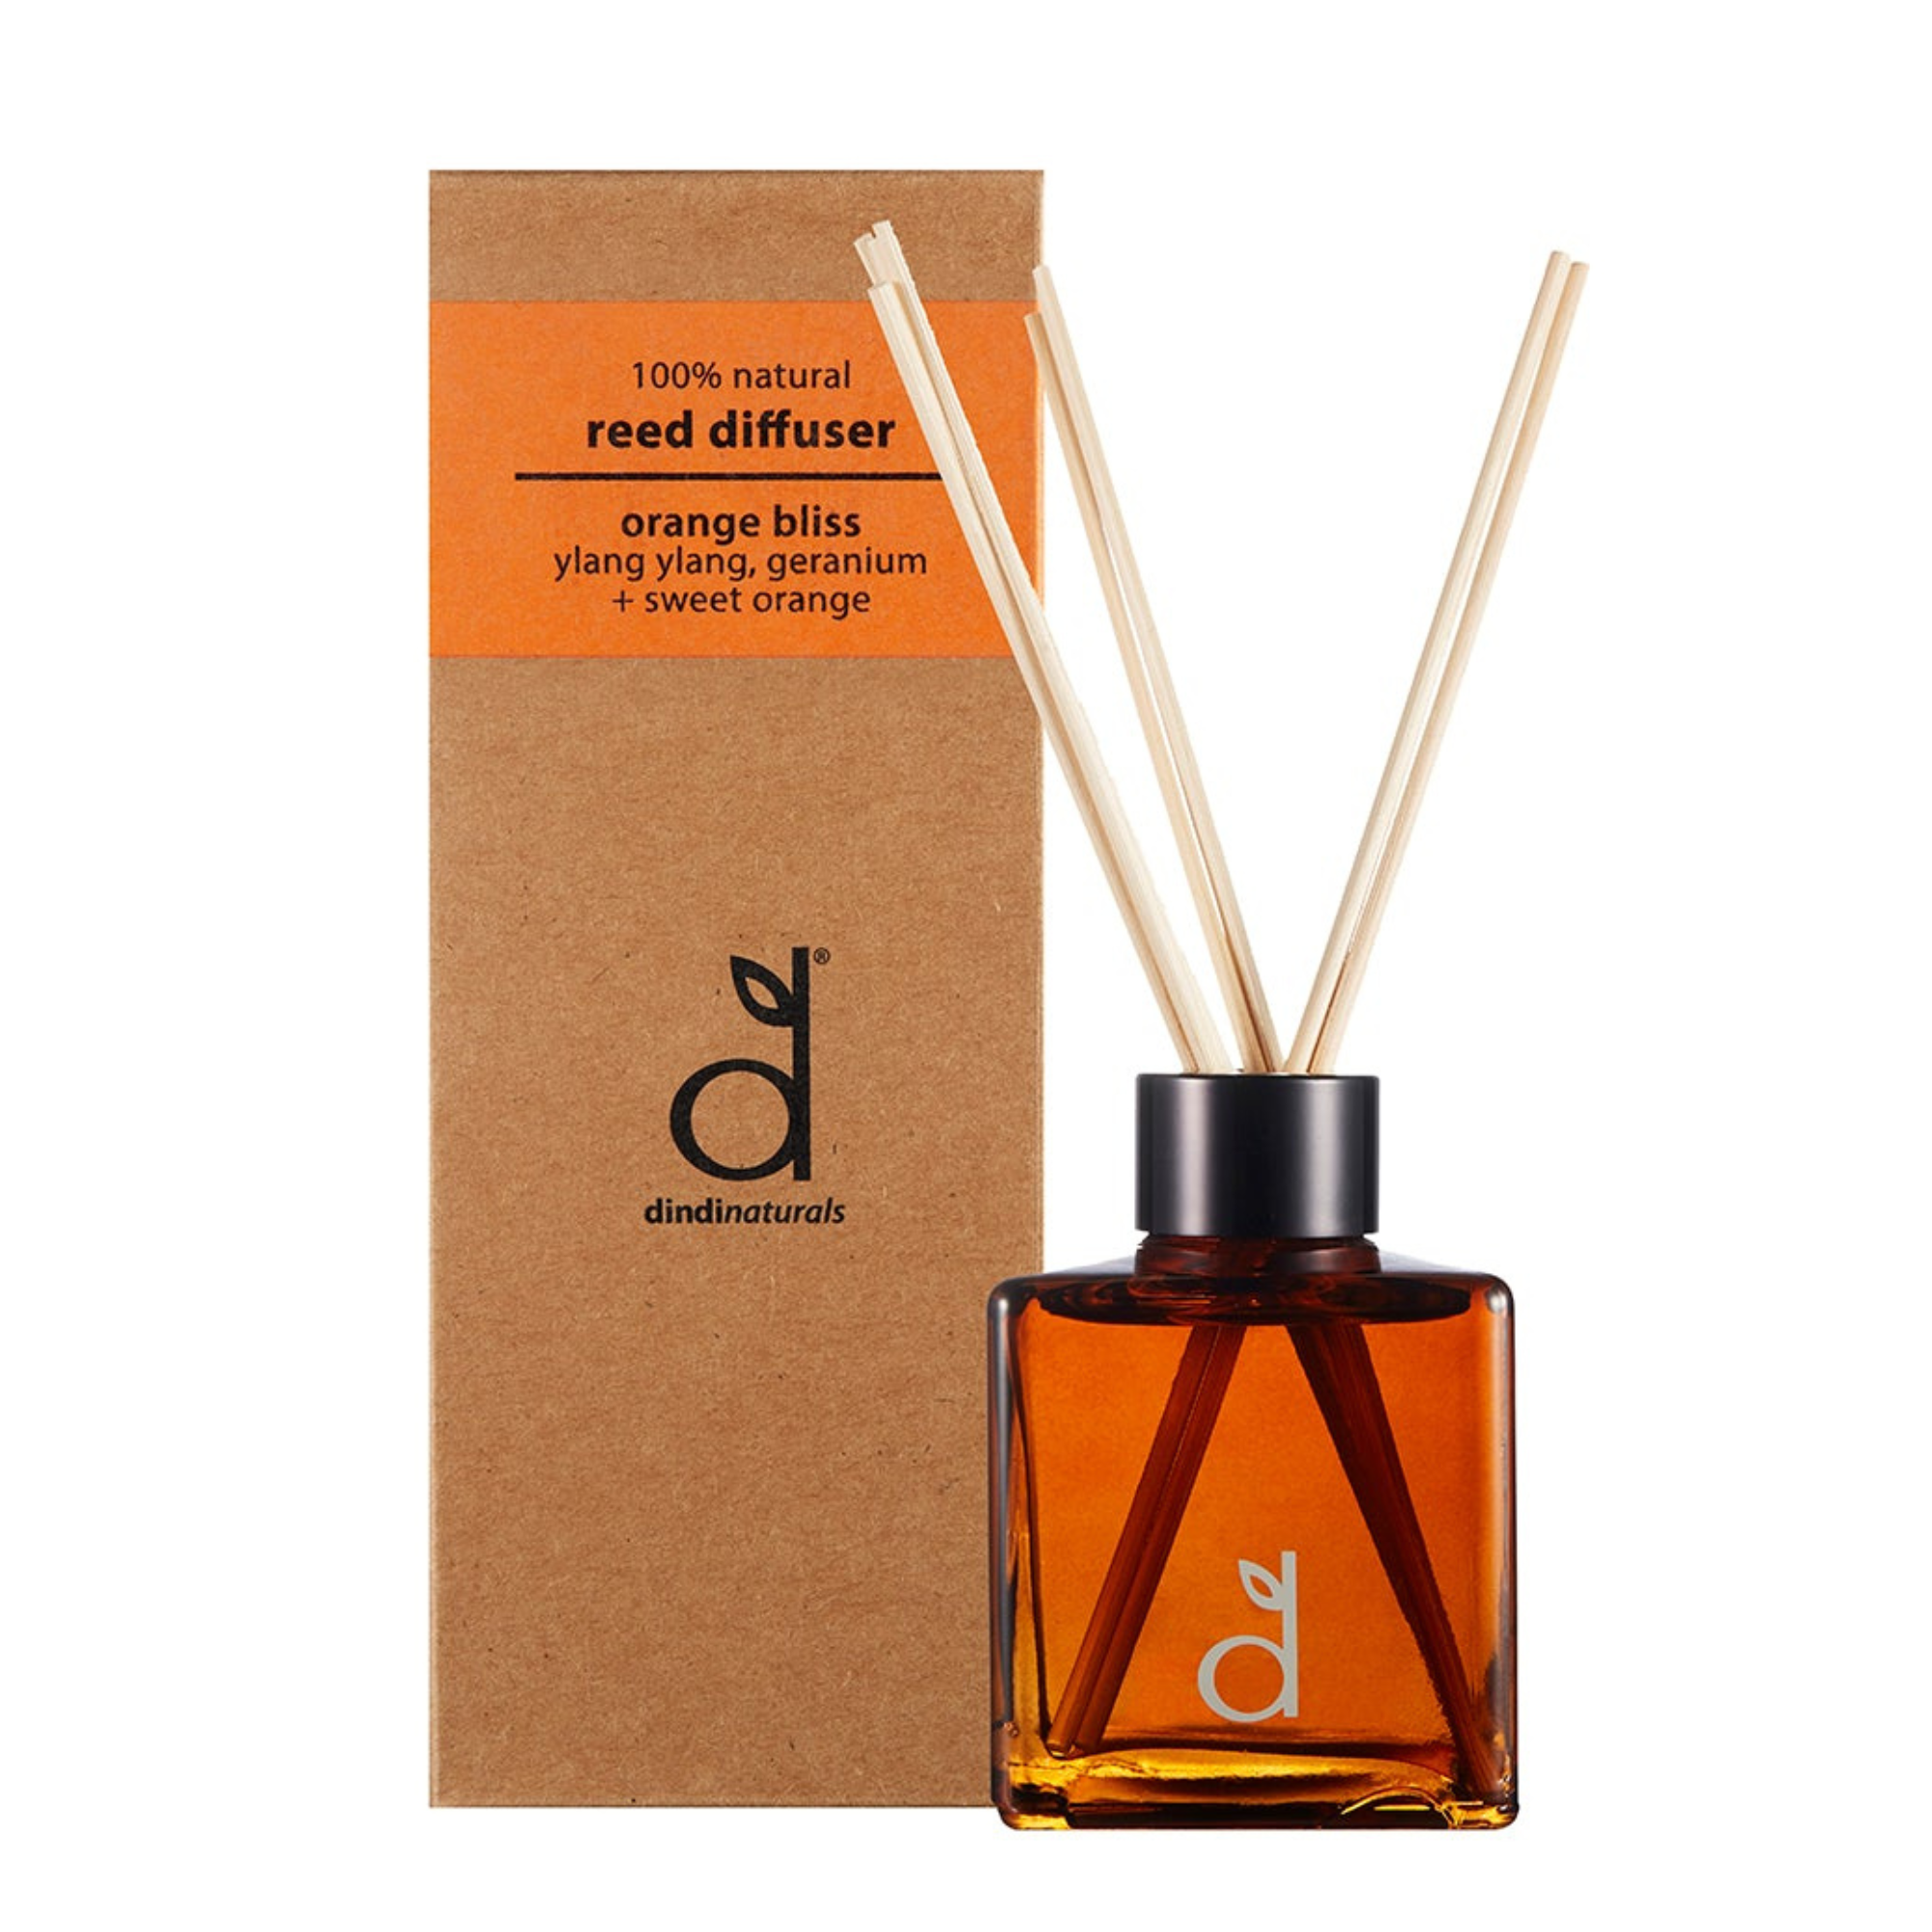 Reed Diffuser Orange Bliss